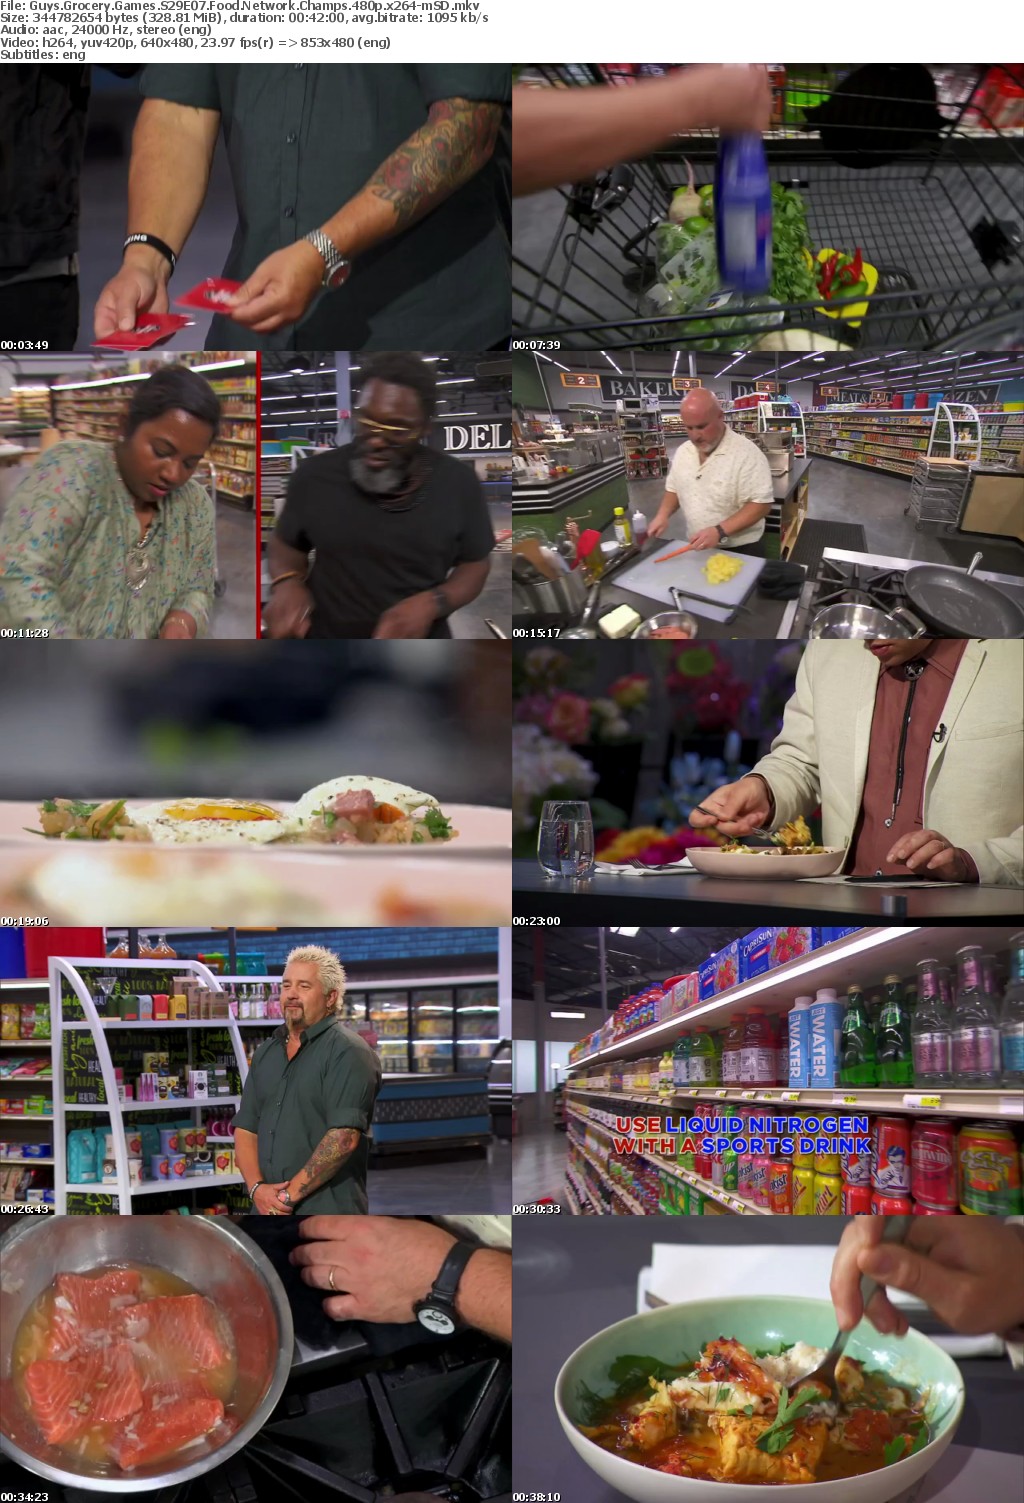 Guys Grocery Games S29E07 Food Network Champs 480p x264-mSD